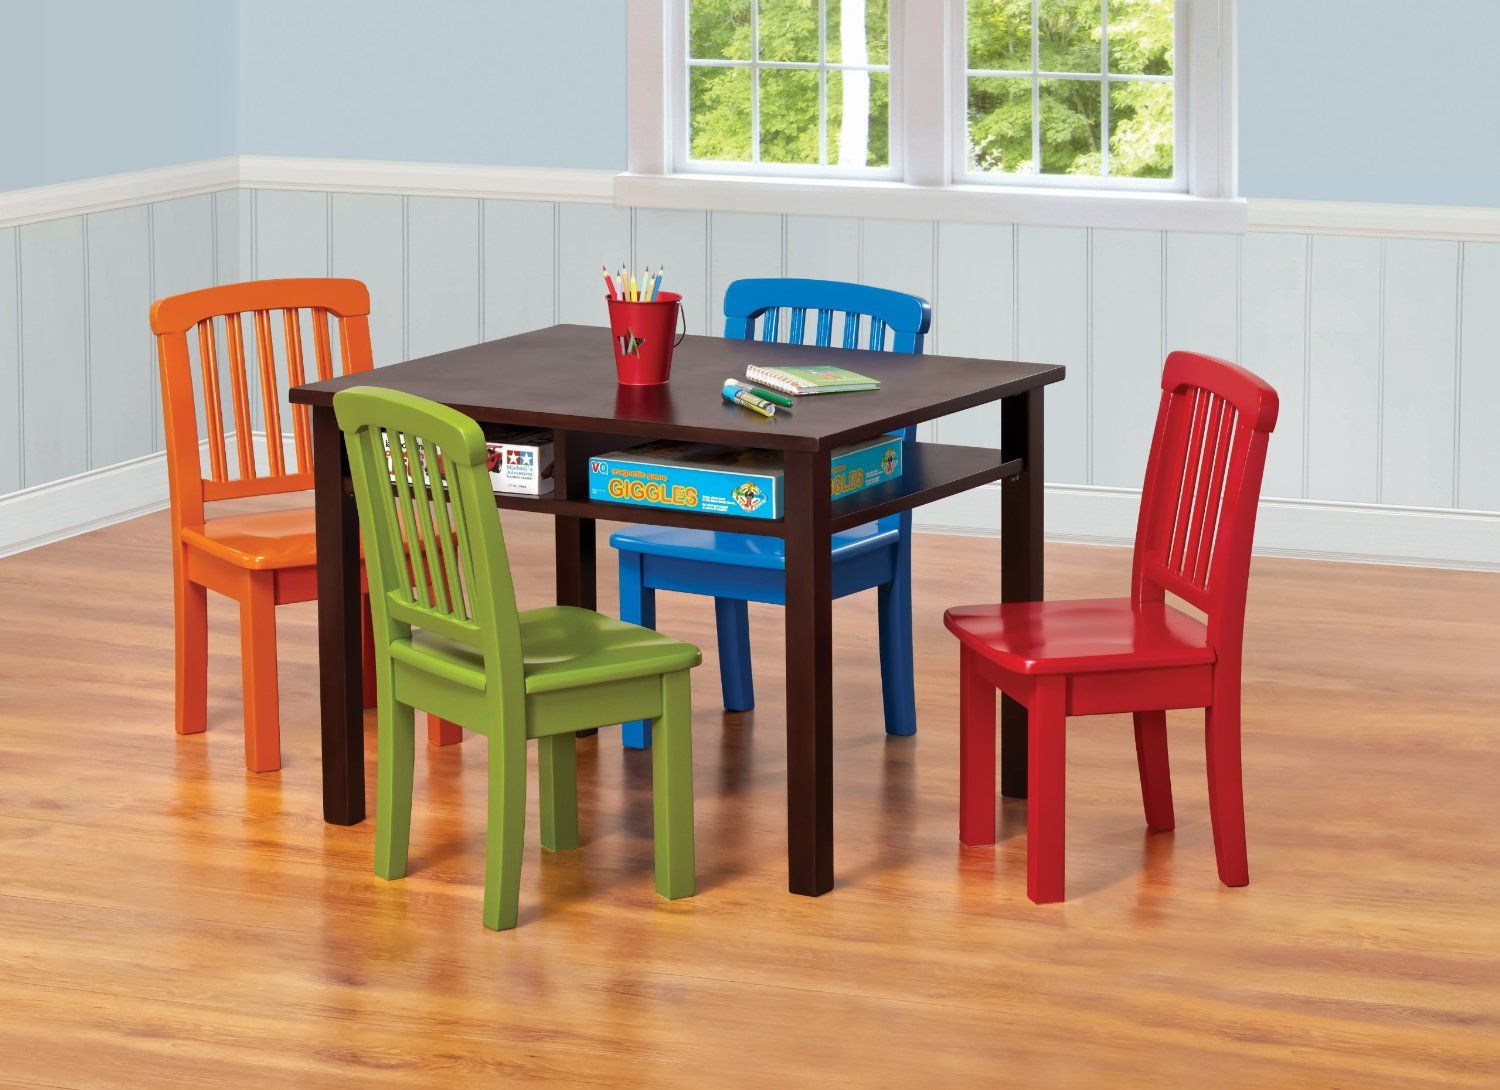 Little Kids Table And Chairs
 Ukid Rectangle Children’s Game Table with 4 Chairs